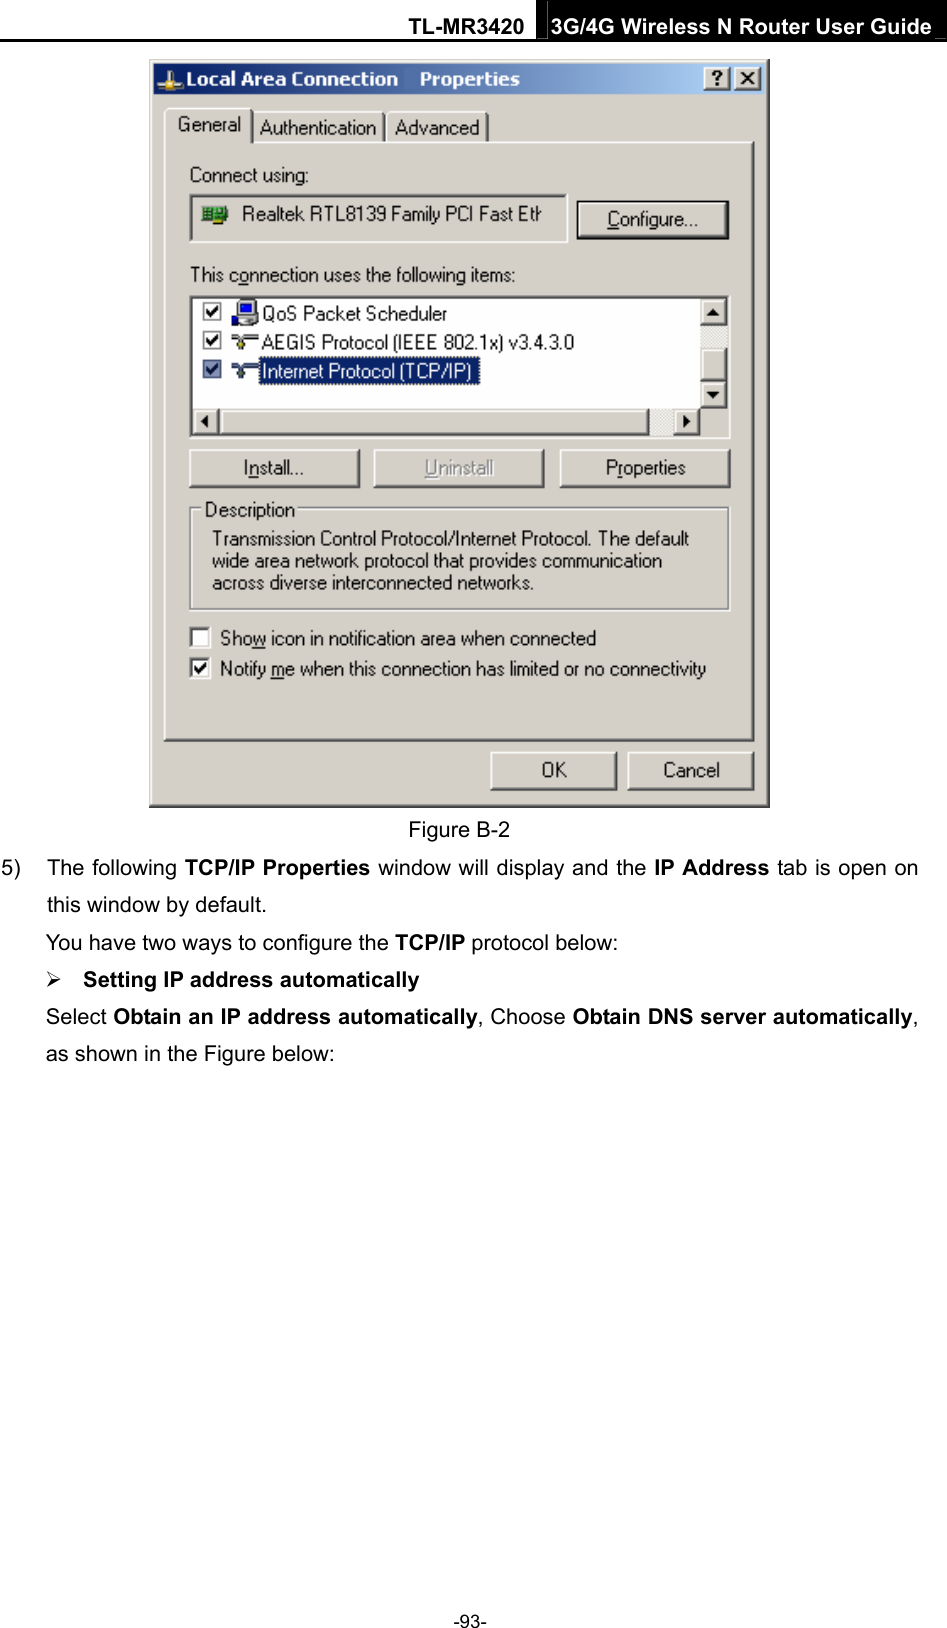 TL-MR3420 3G/4G Wireless N Router User Guide  Figure B-2 5) The following TCP/IP Properties window will display and the IP Address tab is open on this window by default. You have two ways to configure the TCP/IP protocol below:  Setting IP address automatically Select Obtain an IP address automatically, Choose Obtain DNS server automatically, as shown in the Figure below: -93- 